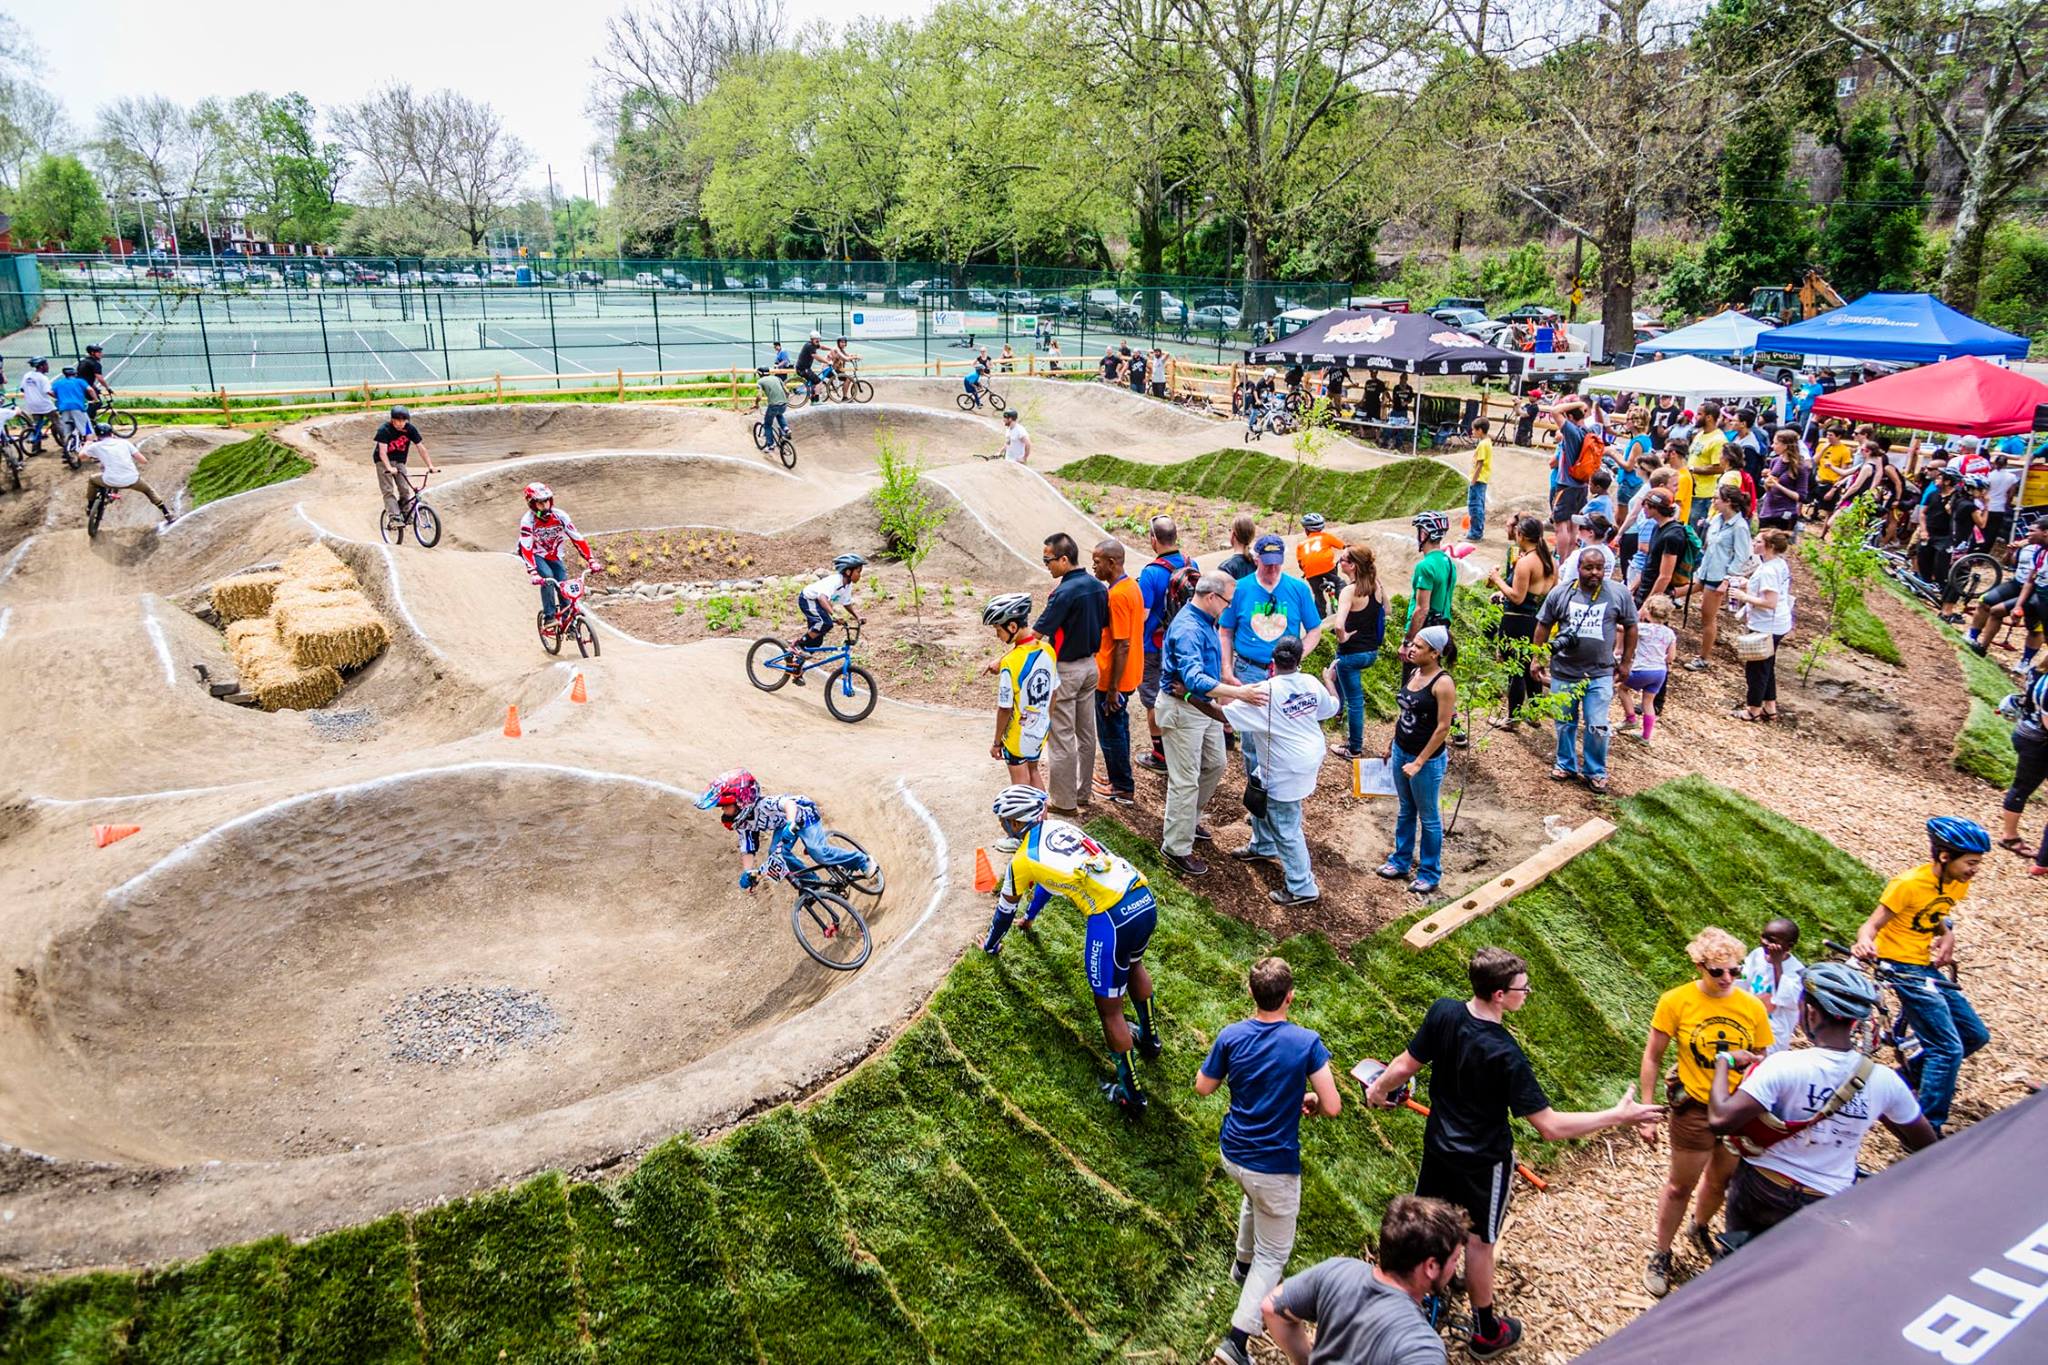 Community members frequenting the highly-popular and eventful Philly Pumptrack. Photo courtesy of the Philly Pumptrack.